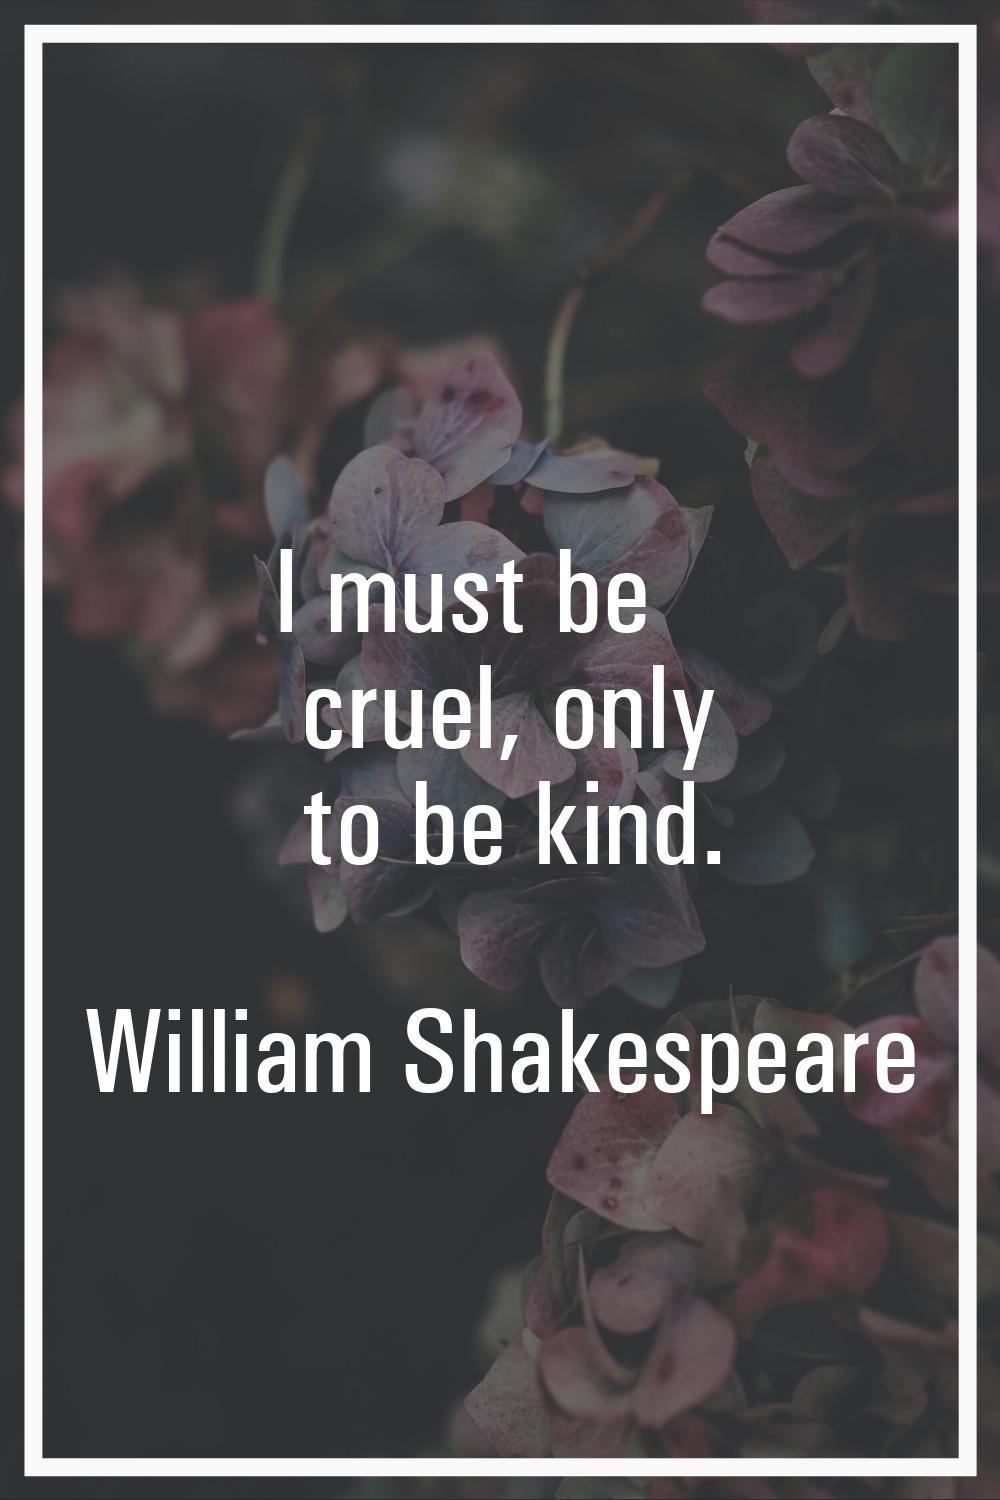 I must be cruel, only to be kind.